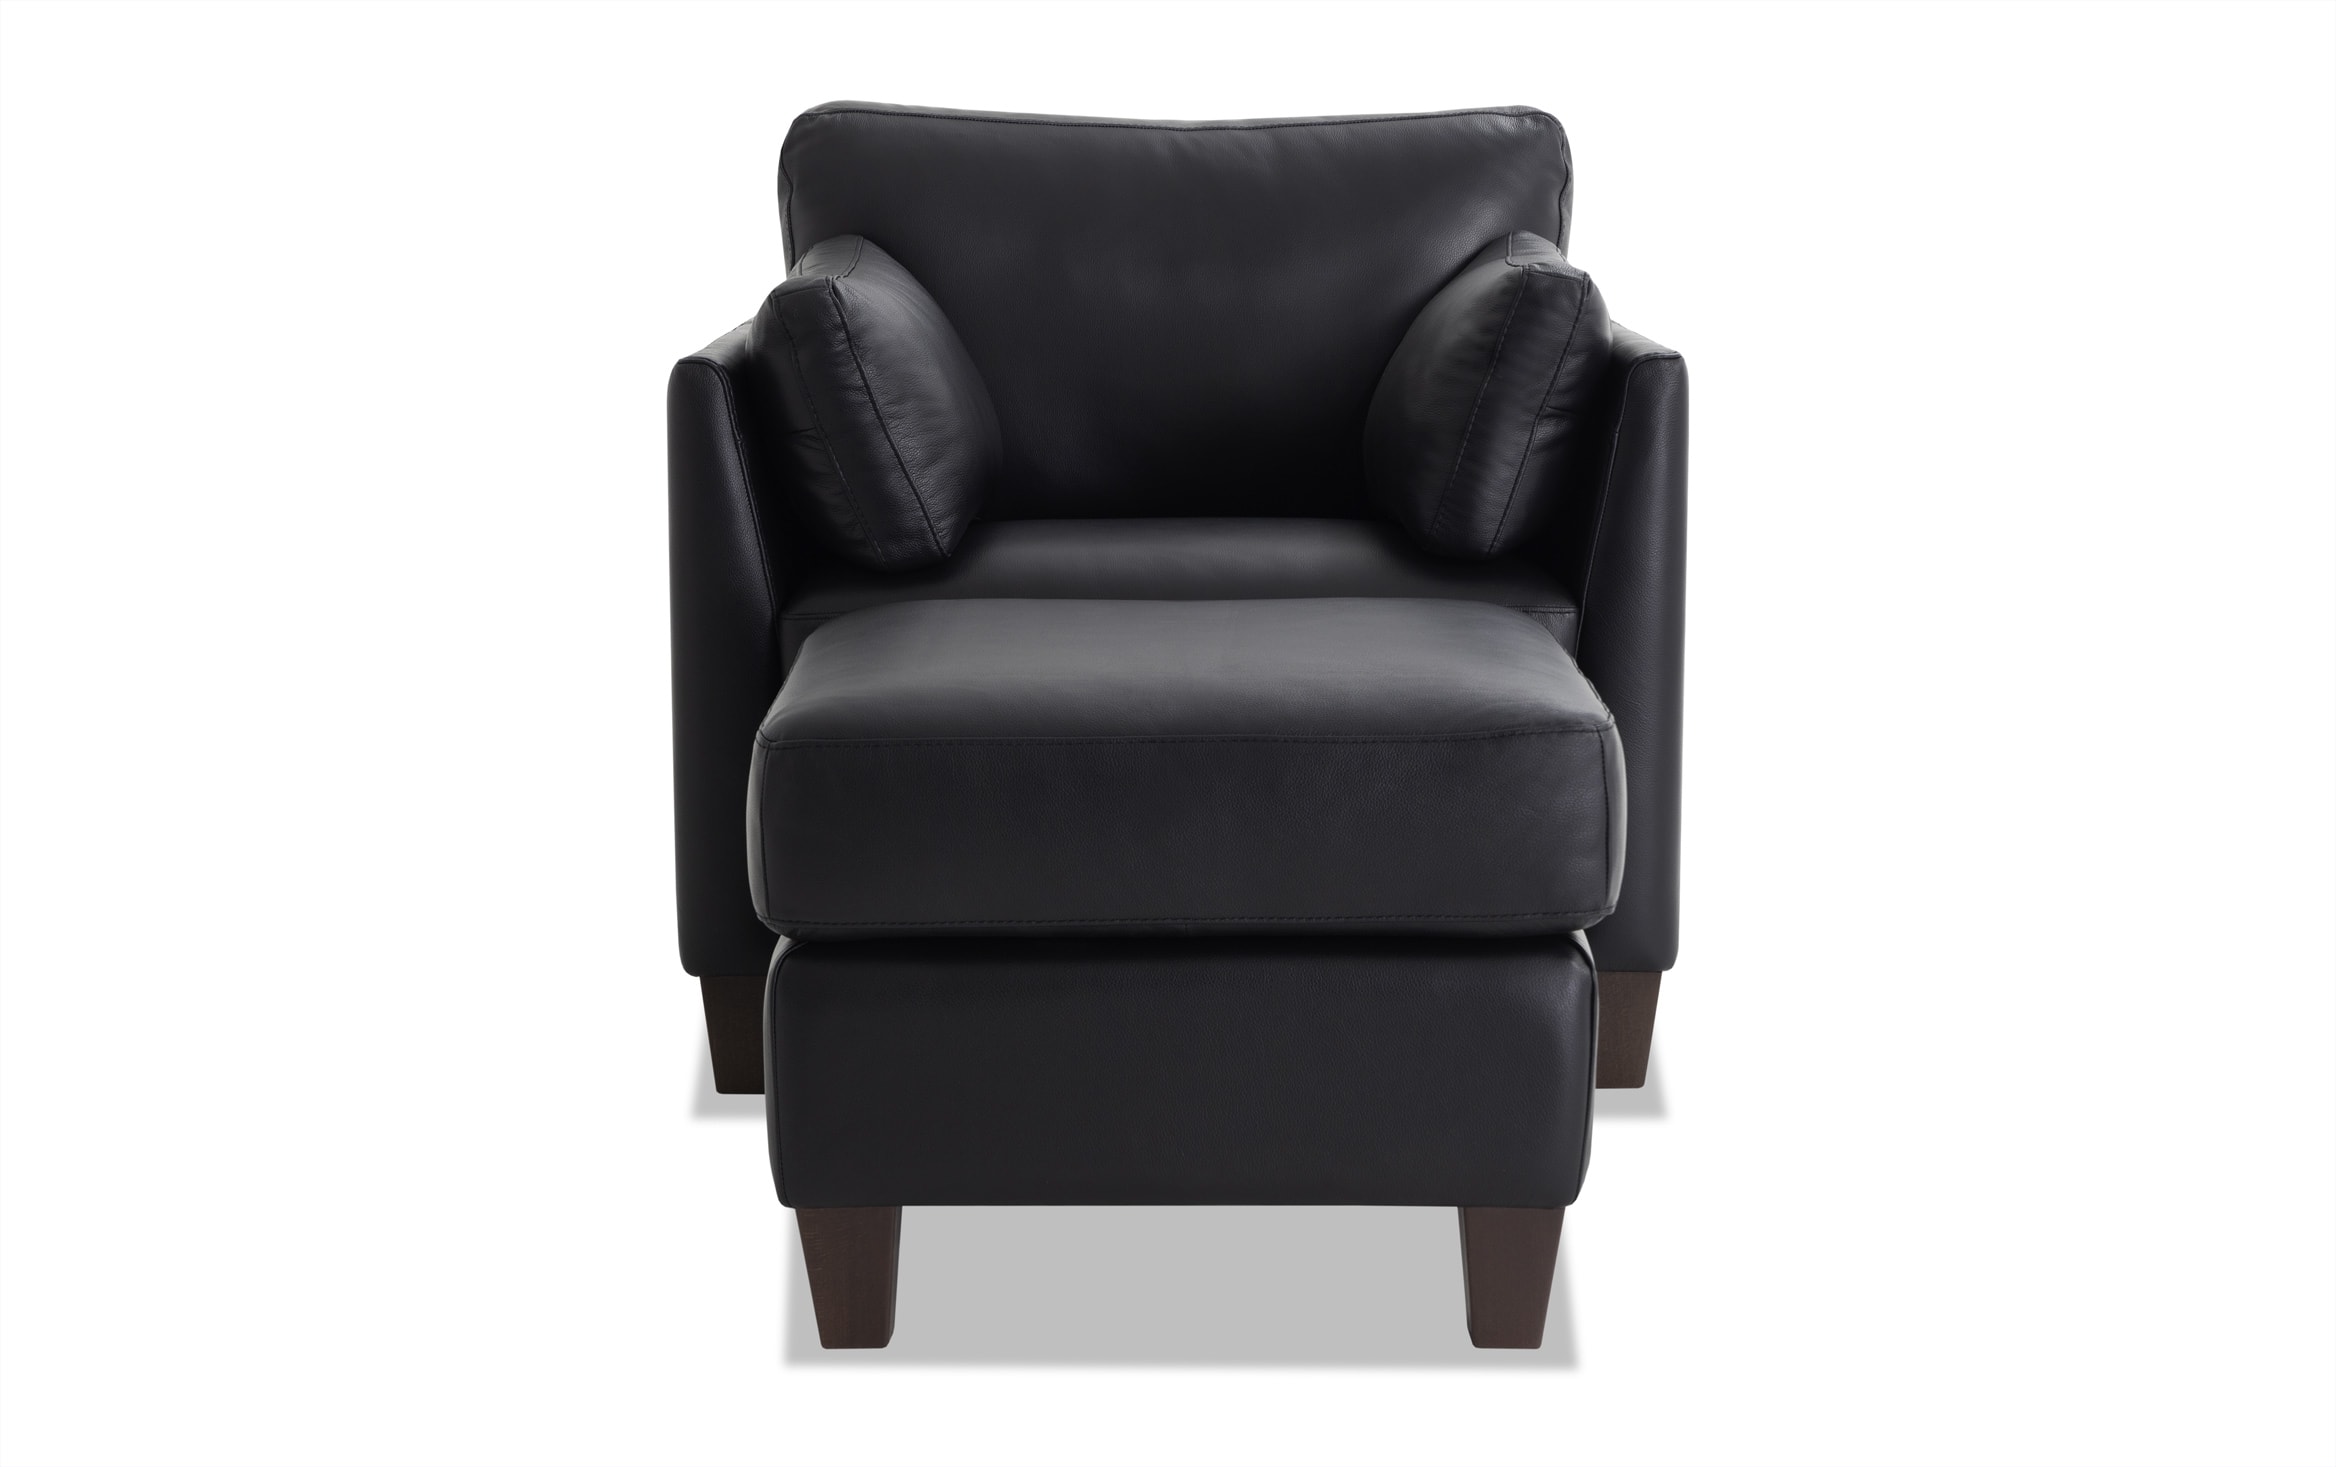 Antonio Black Leather Chair Ottoman, Black Leather Chair With Ottoman